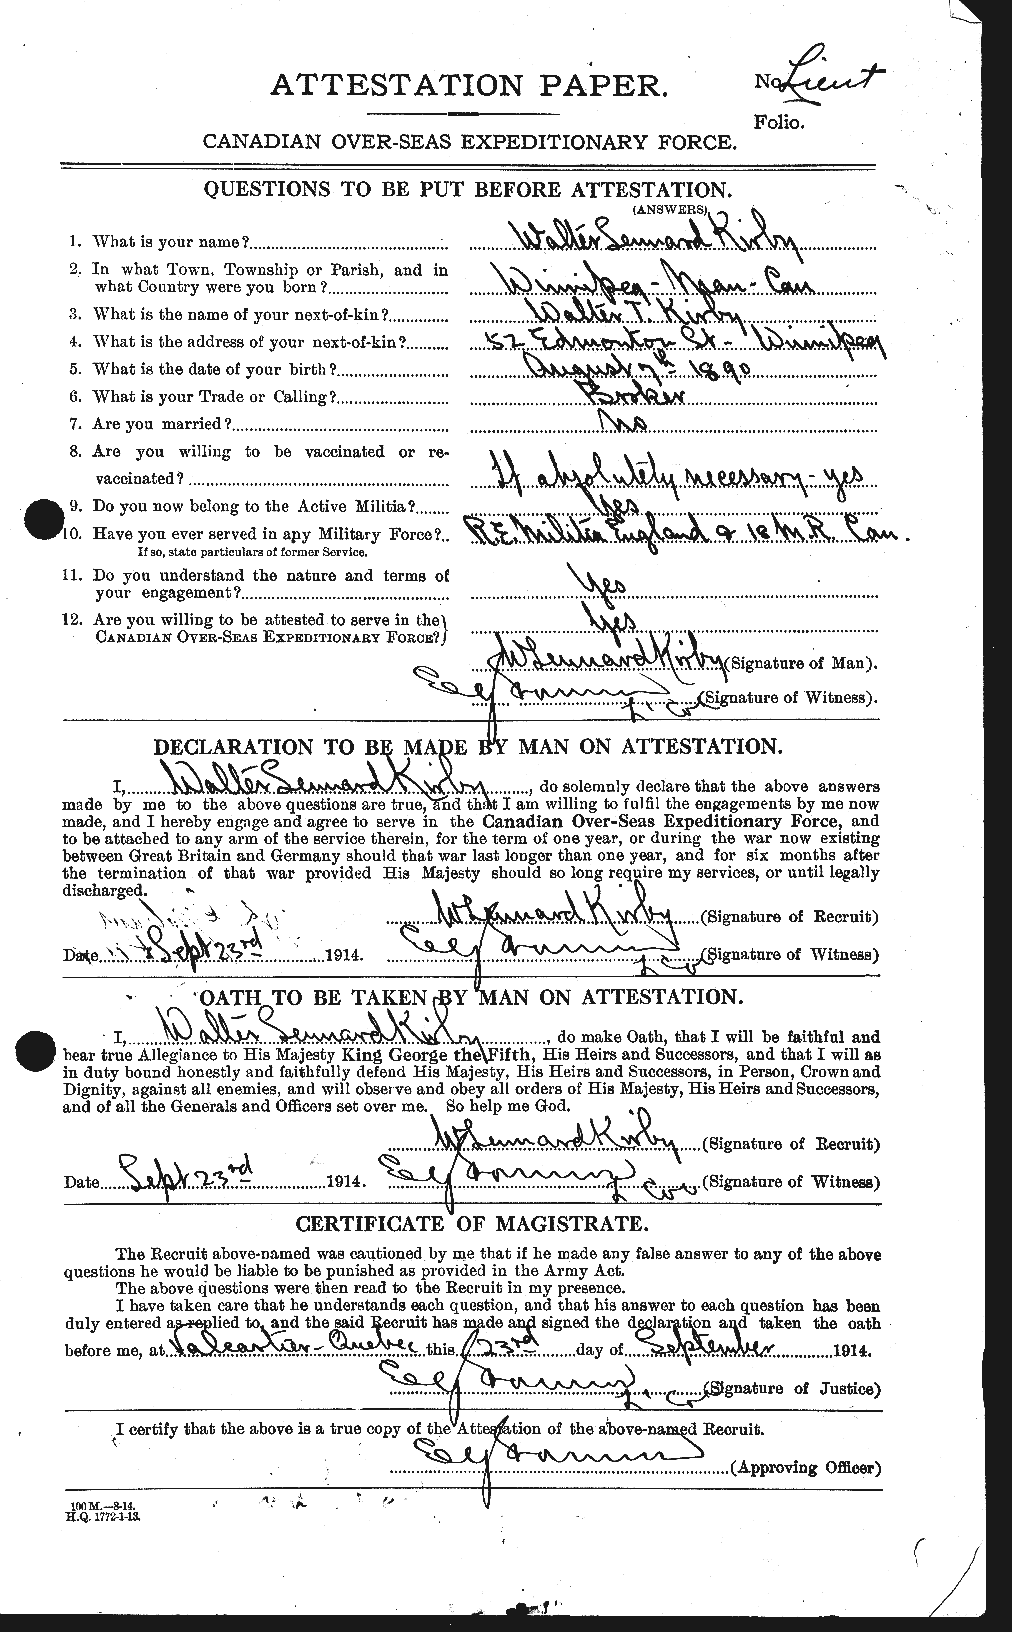 Personnel Records of the First World War - CEF 437289a